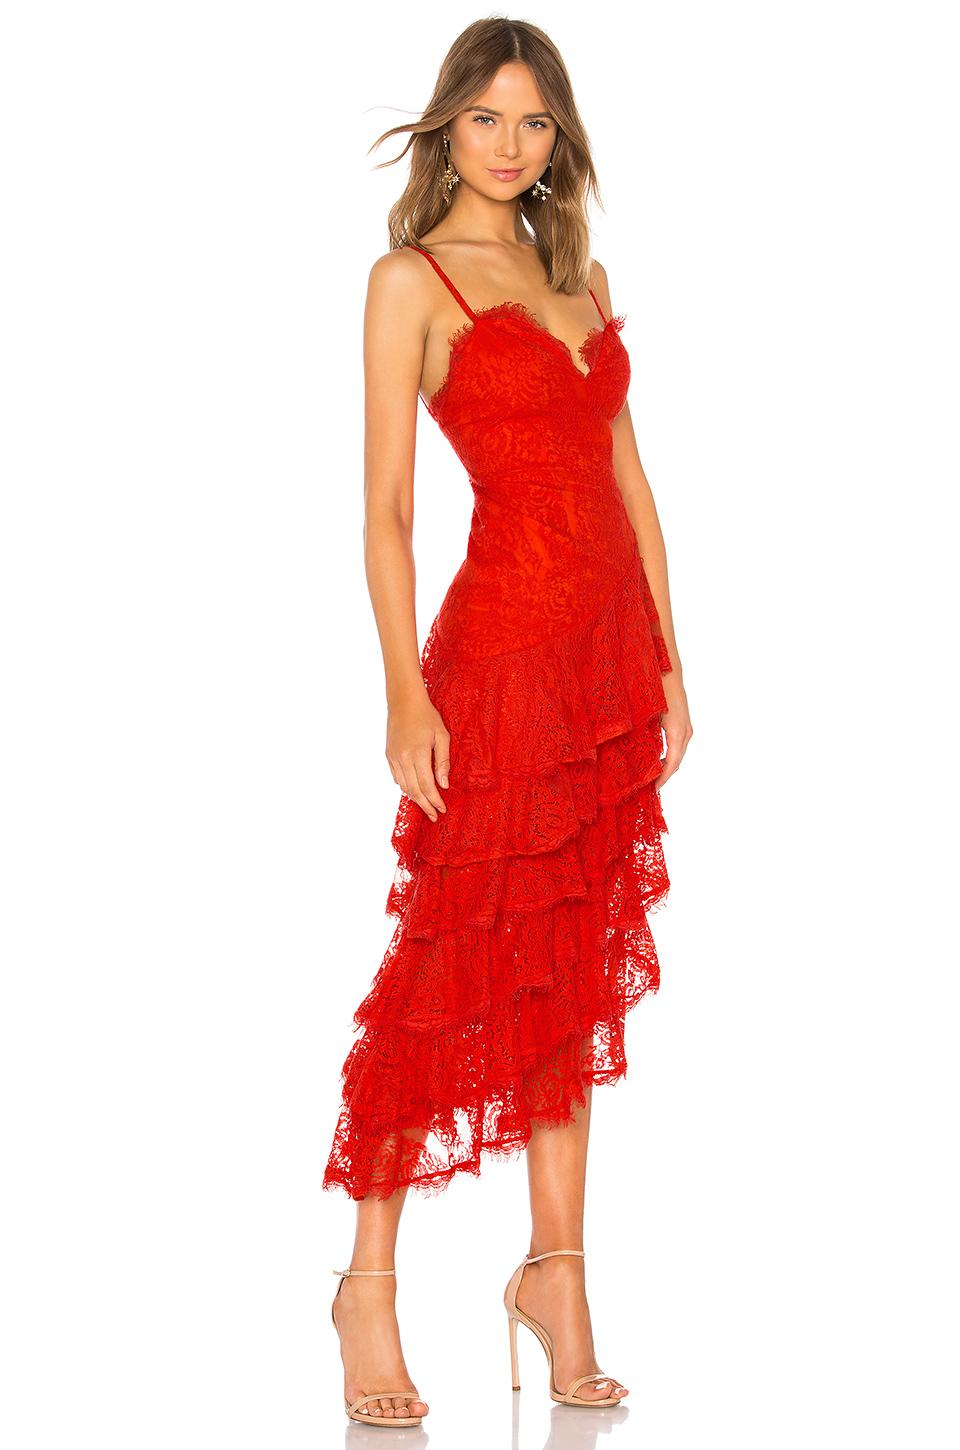 MAJORELLE Synthetic Oracle Gown in Red - Lyst